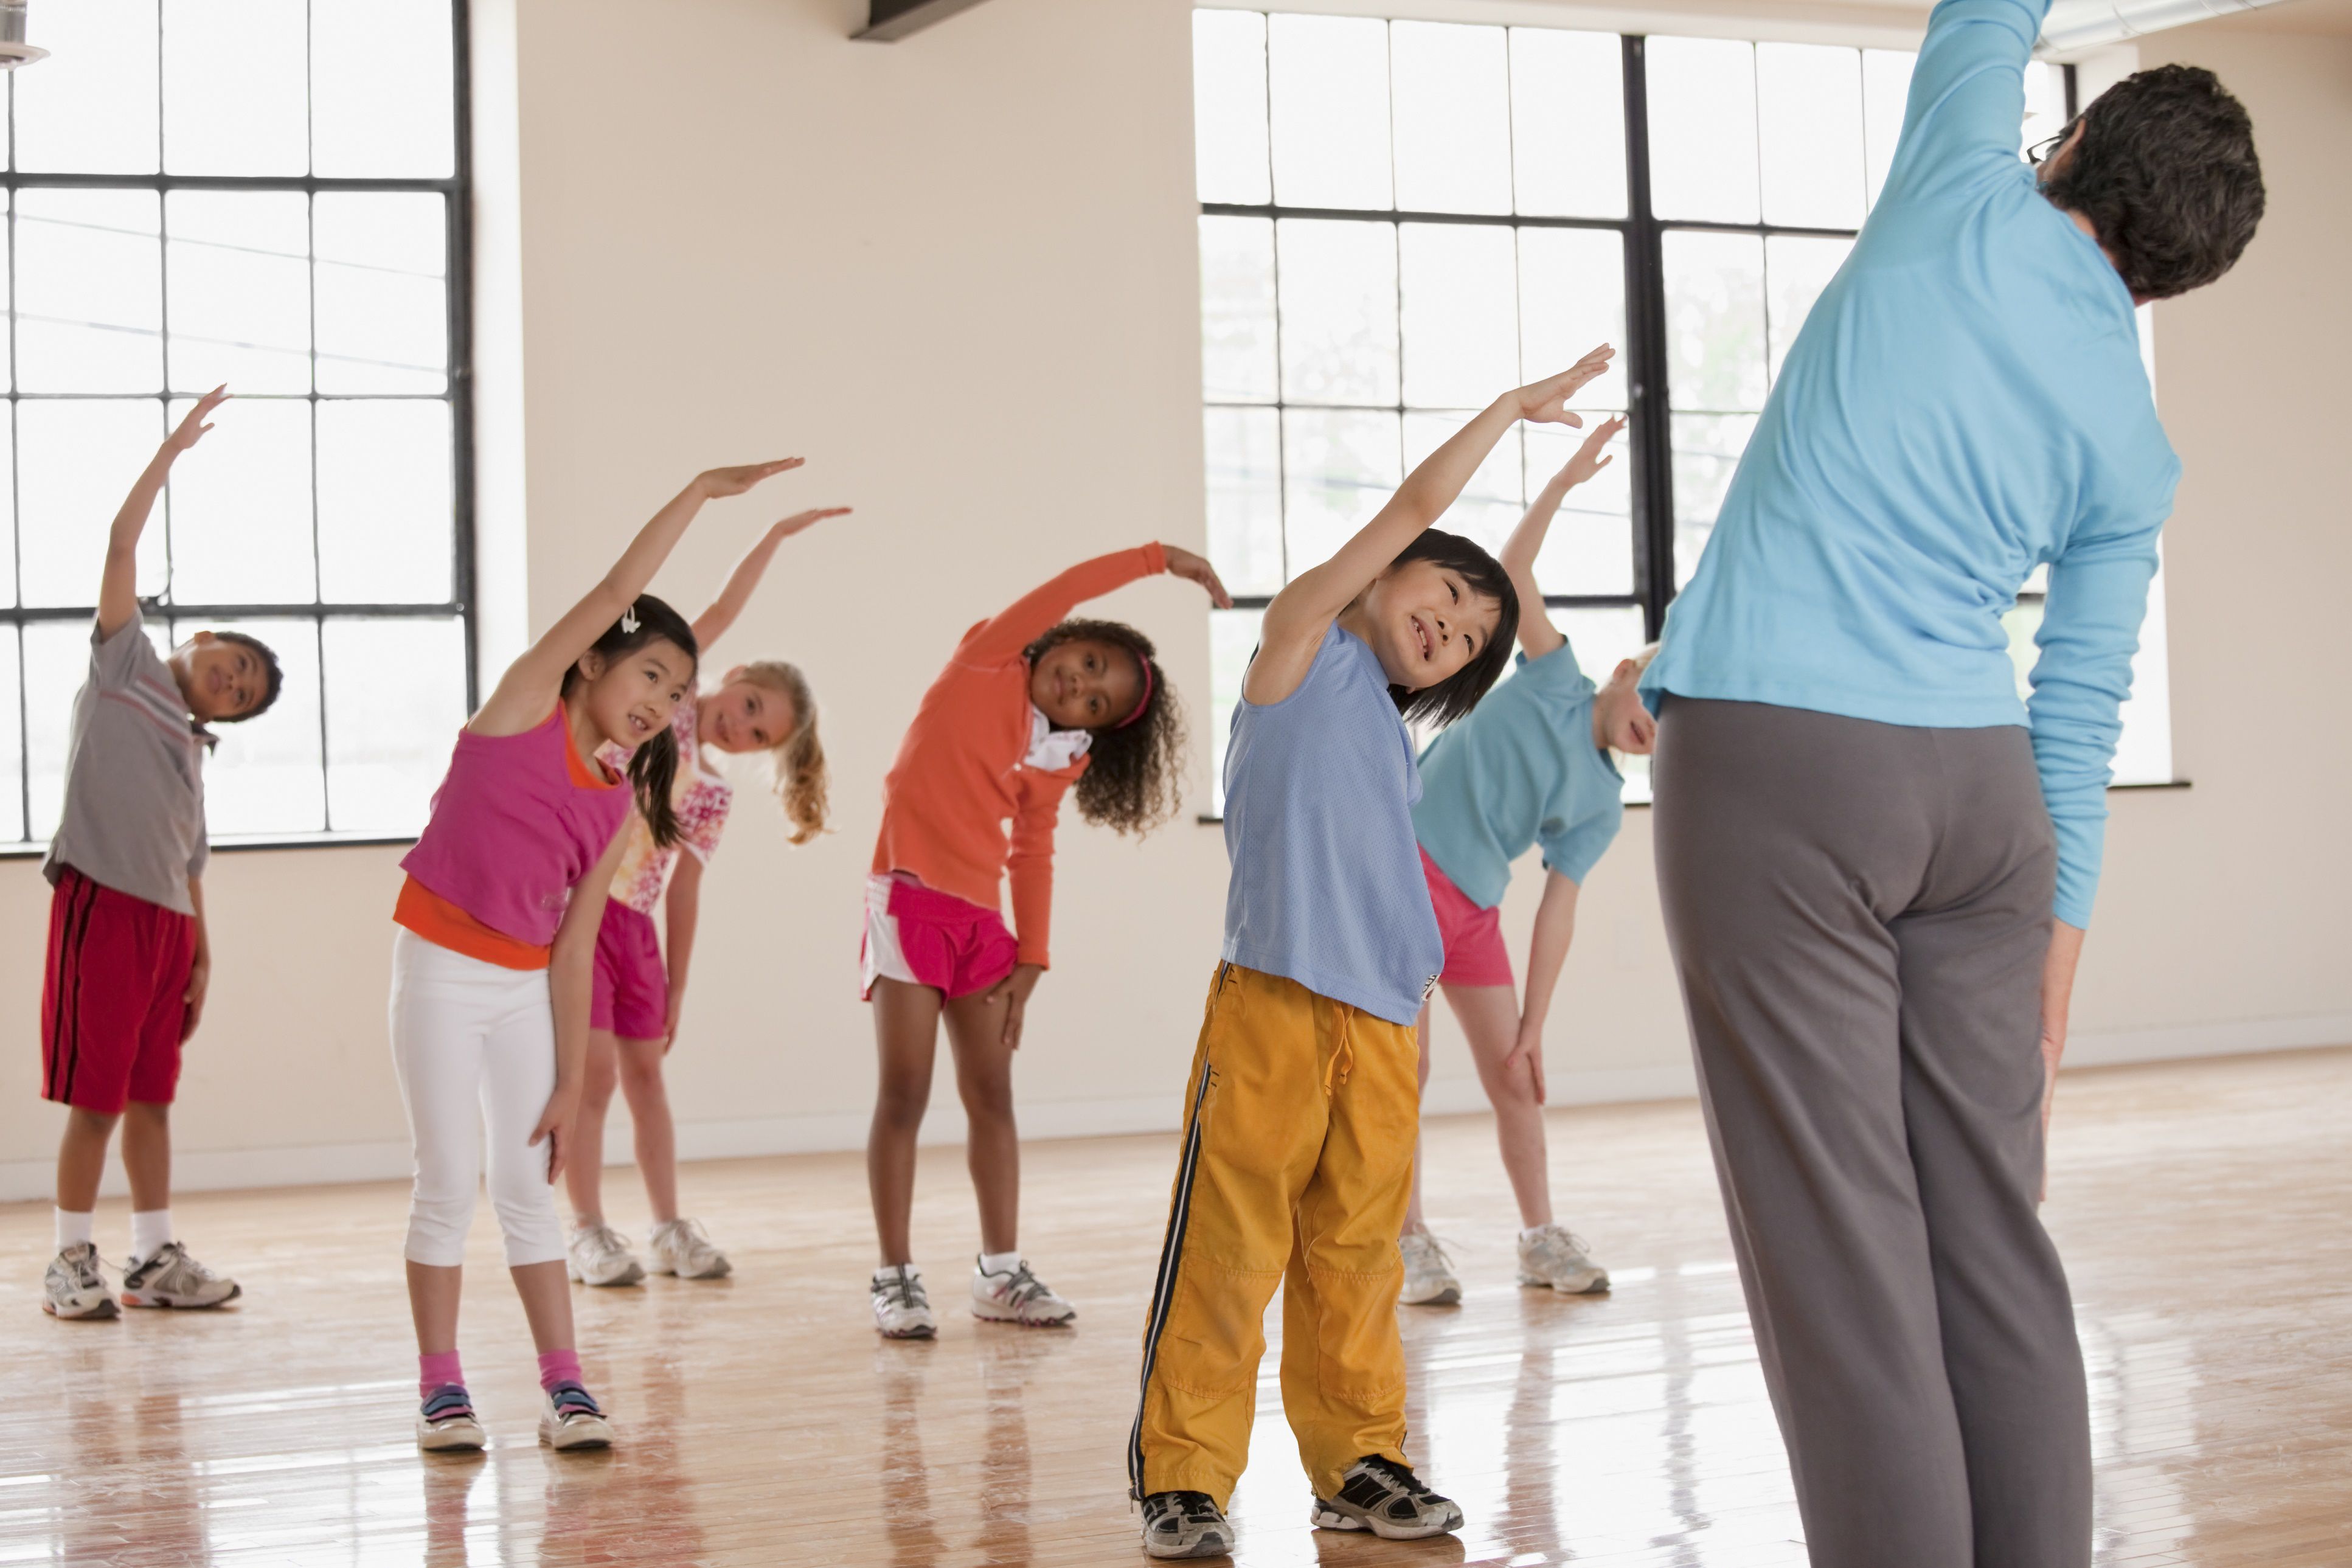 Getty_5_year_old_children_gym_class_stretching_LARGE_ArielSkelley-568348f13df78ccc15c6c9aa.jpg